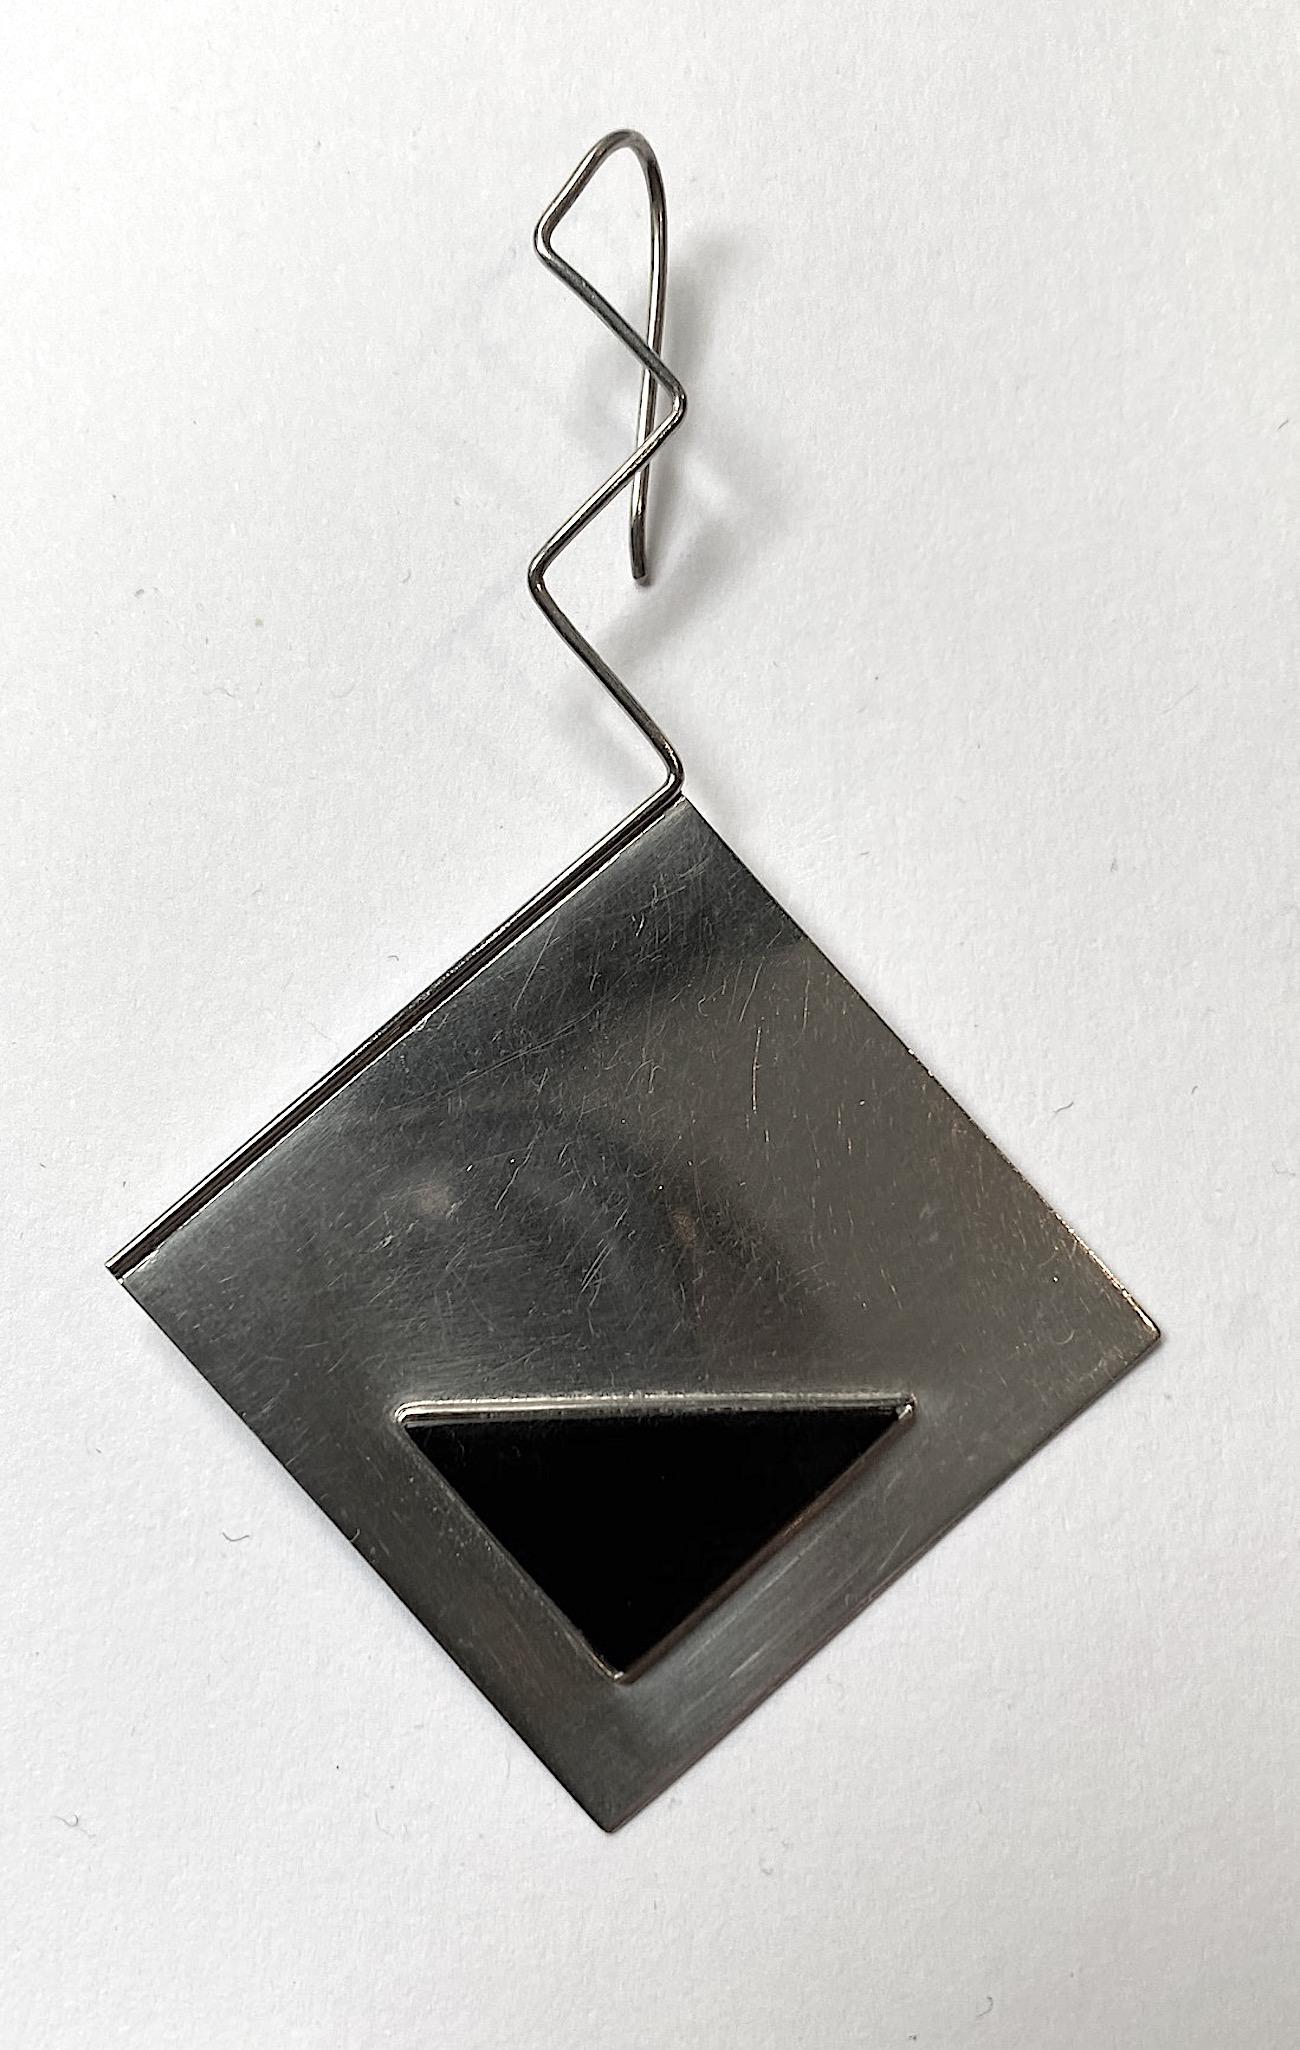 Artist made large sterling silver square pendant earrings from the 1980s. Each pendant is 1.63 inches square and set with a black onyx isosceles triangle a quarter of an inch from the bottom edges. The square pendants are turned to hang in a diamond